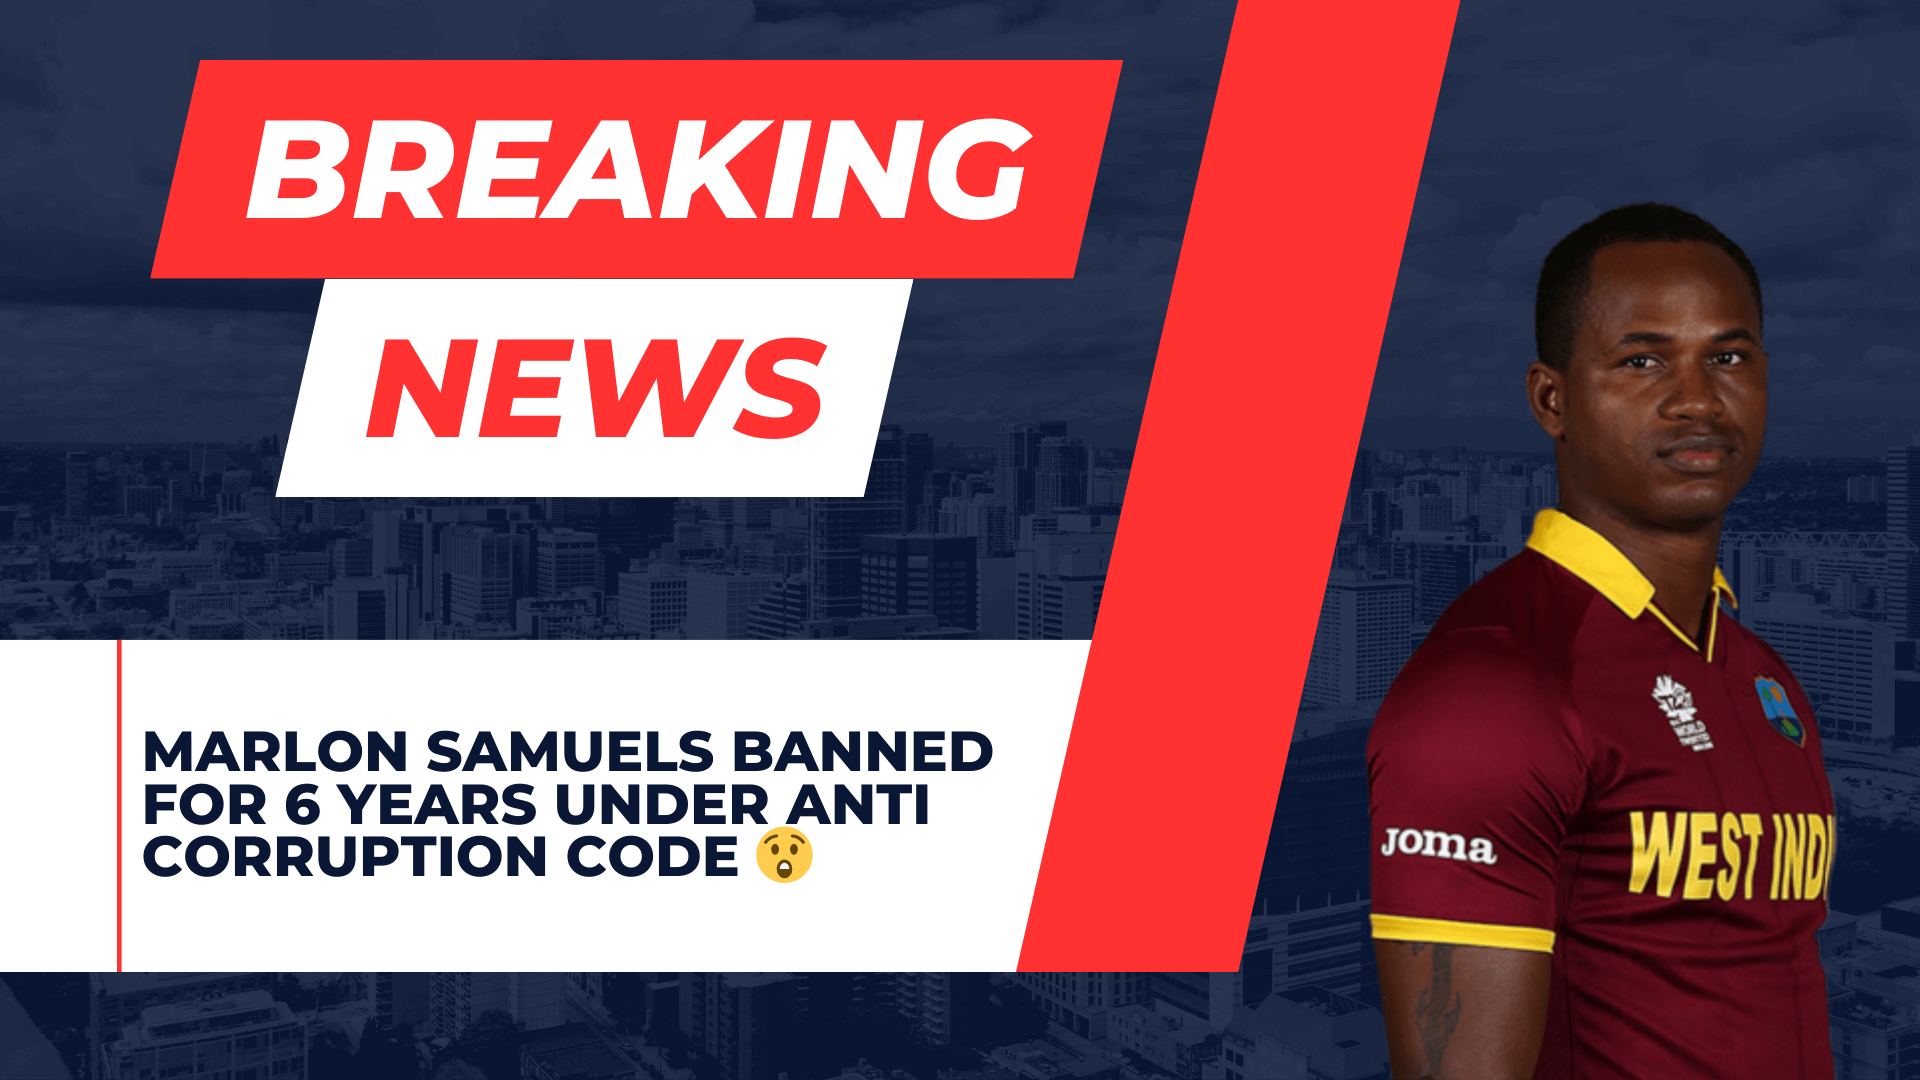 Marlon Samuels has been banned for six years under the anti-corruption code